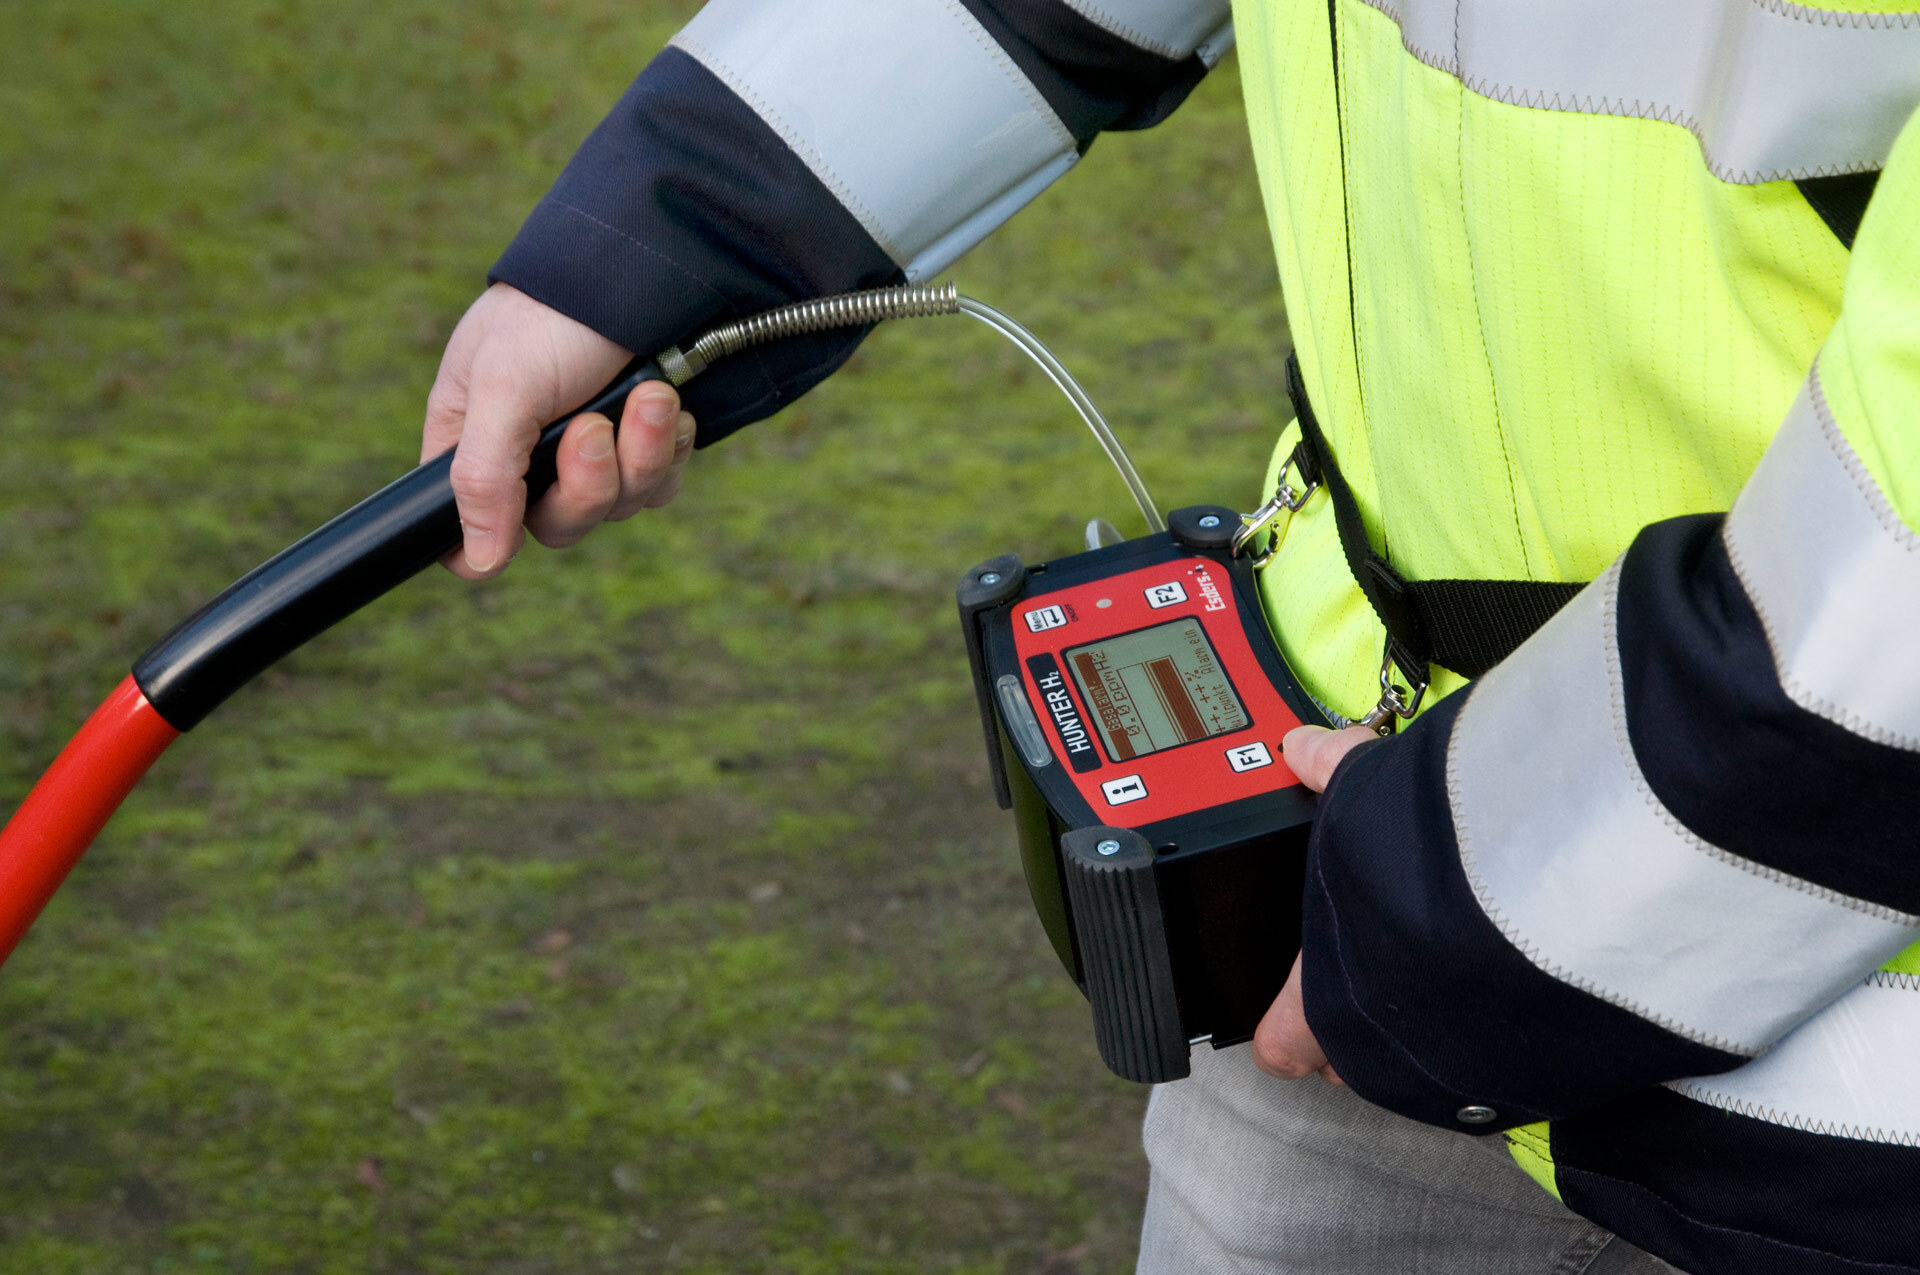 Expert using the HUNTER H2 water leakage detection device